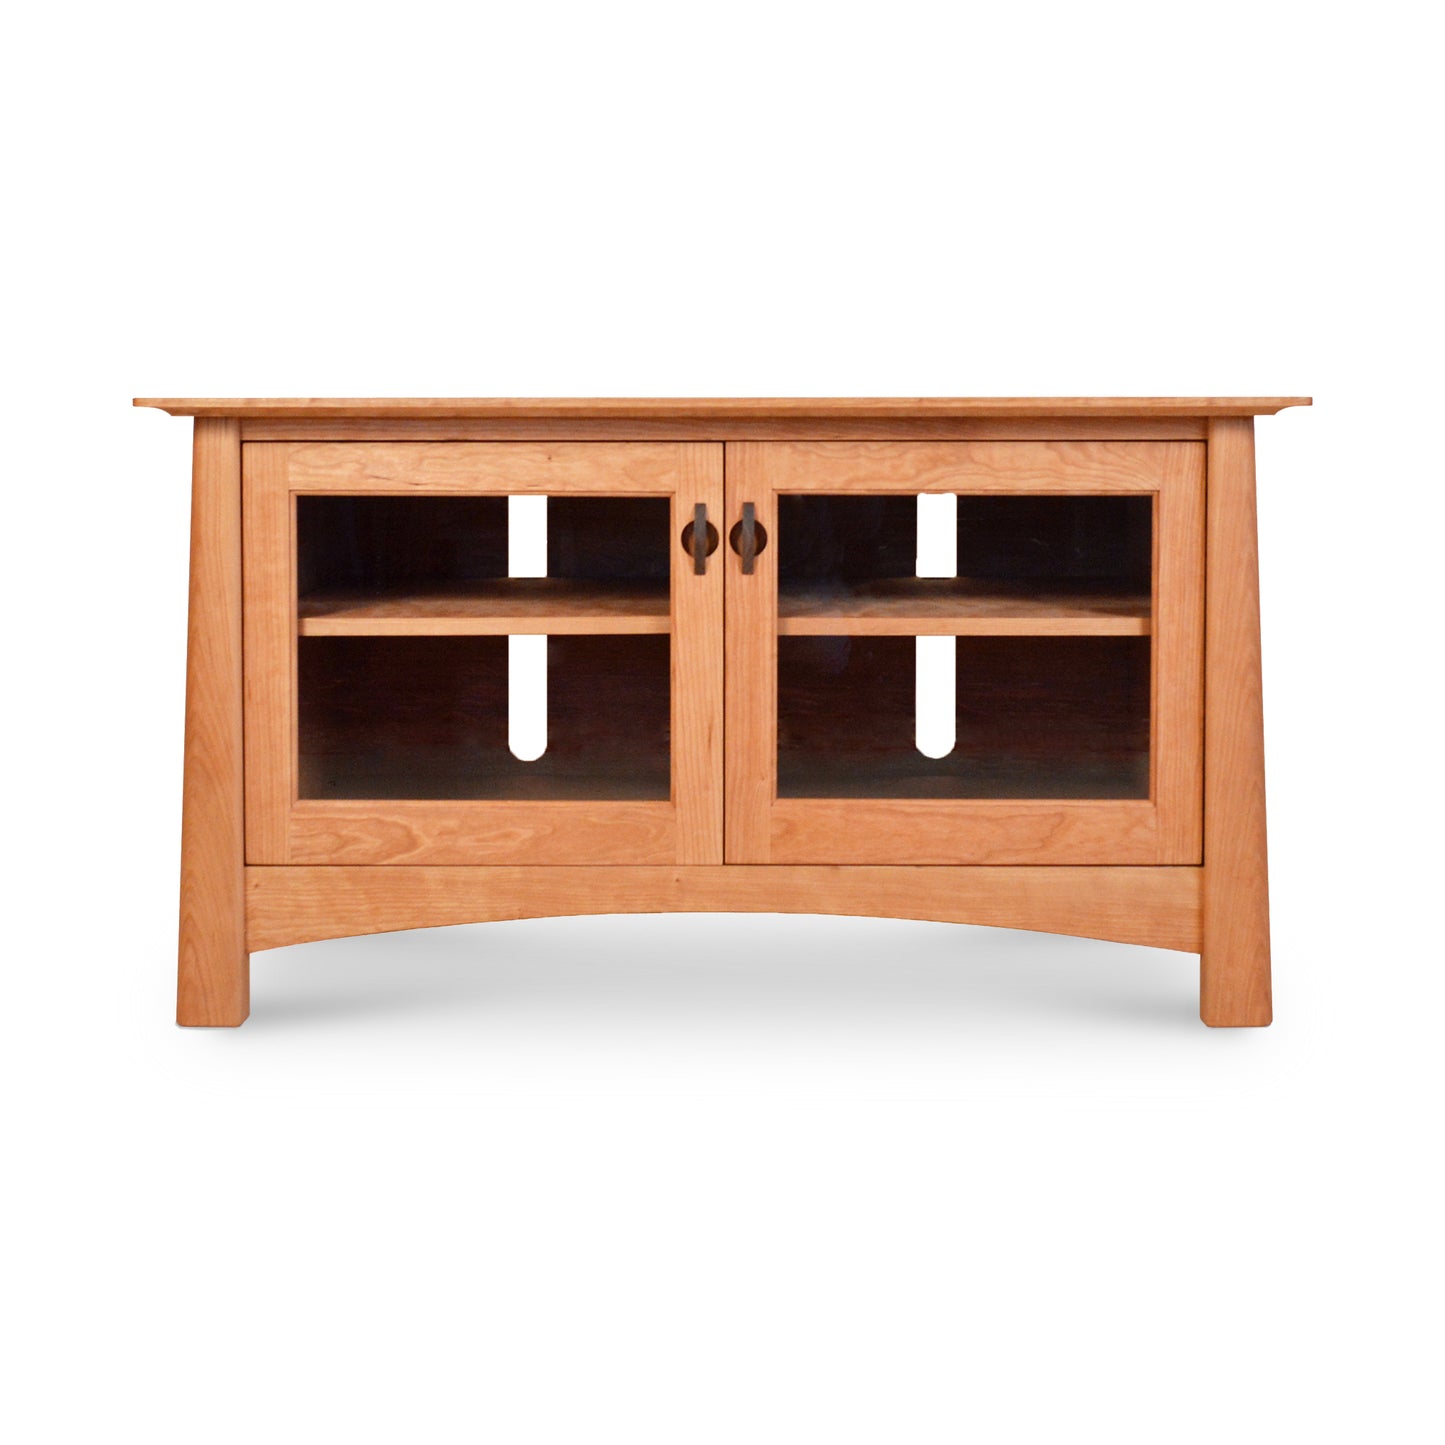 A Maple Corner Woodworks Cherry Moon 49" TV-Media Console with a curved base, featuring two glass doors and internal shelves, set against a plain white background.